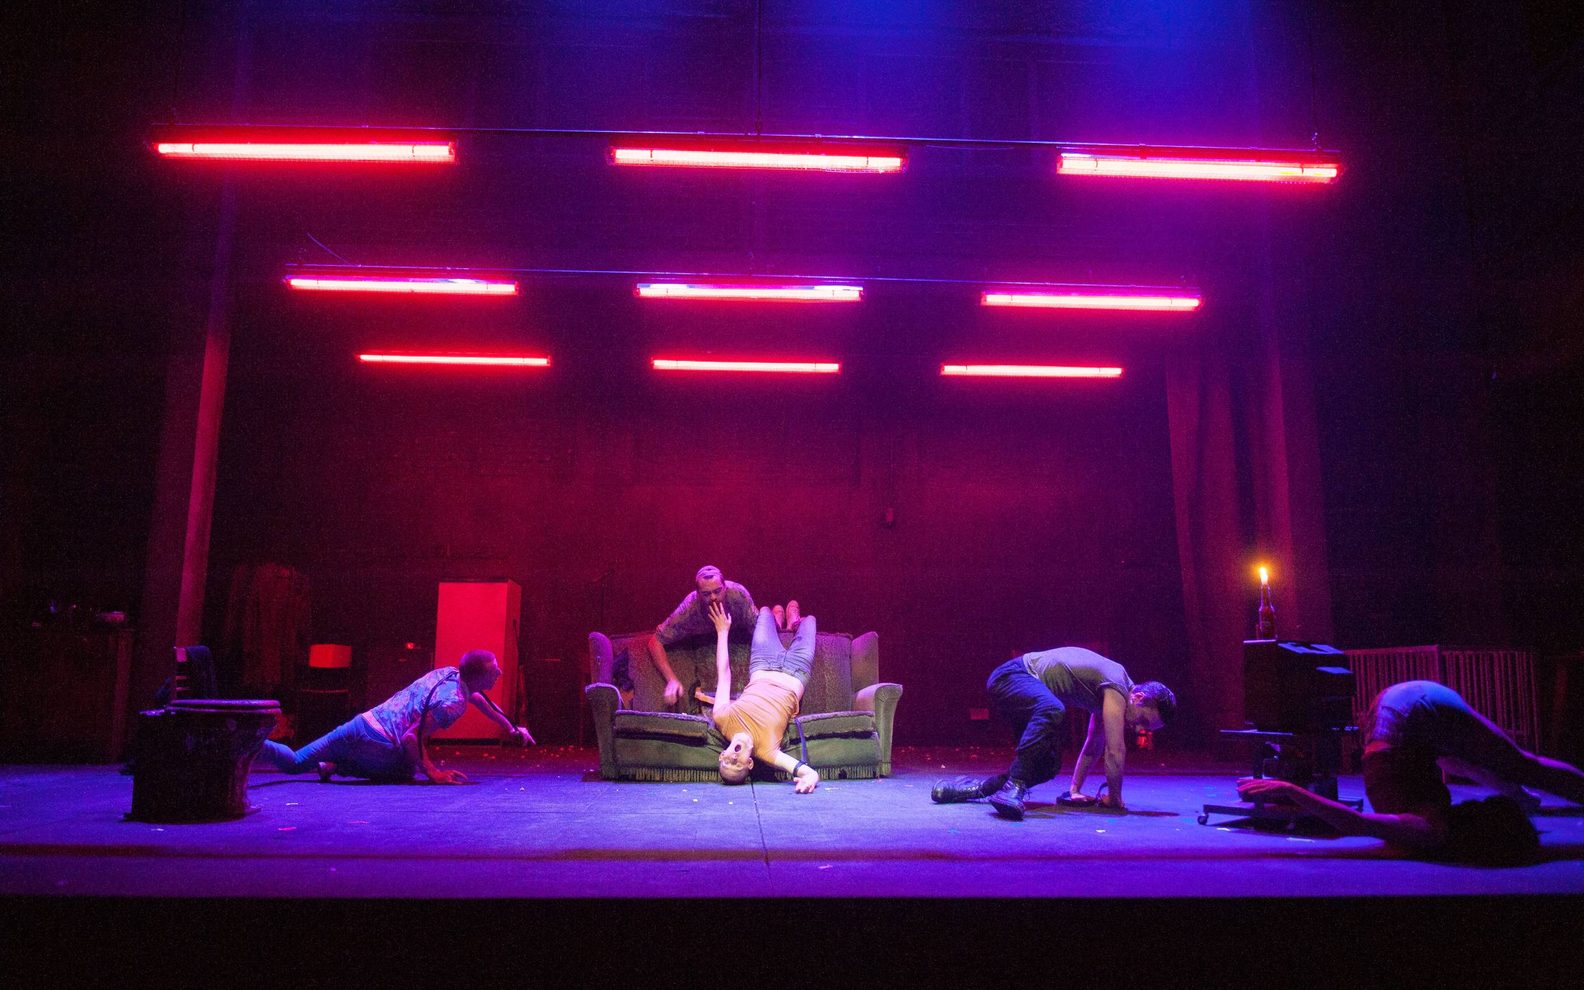 There are three people on stage who are all crouched or rolling on the floor. Two more people are draped over a sofa. Red neon lights hang from the ceiling.